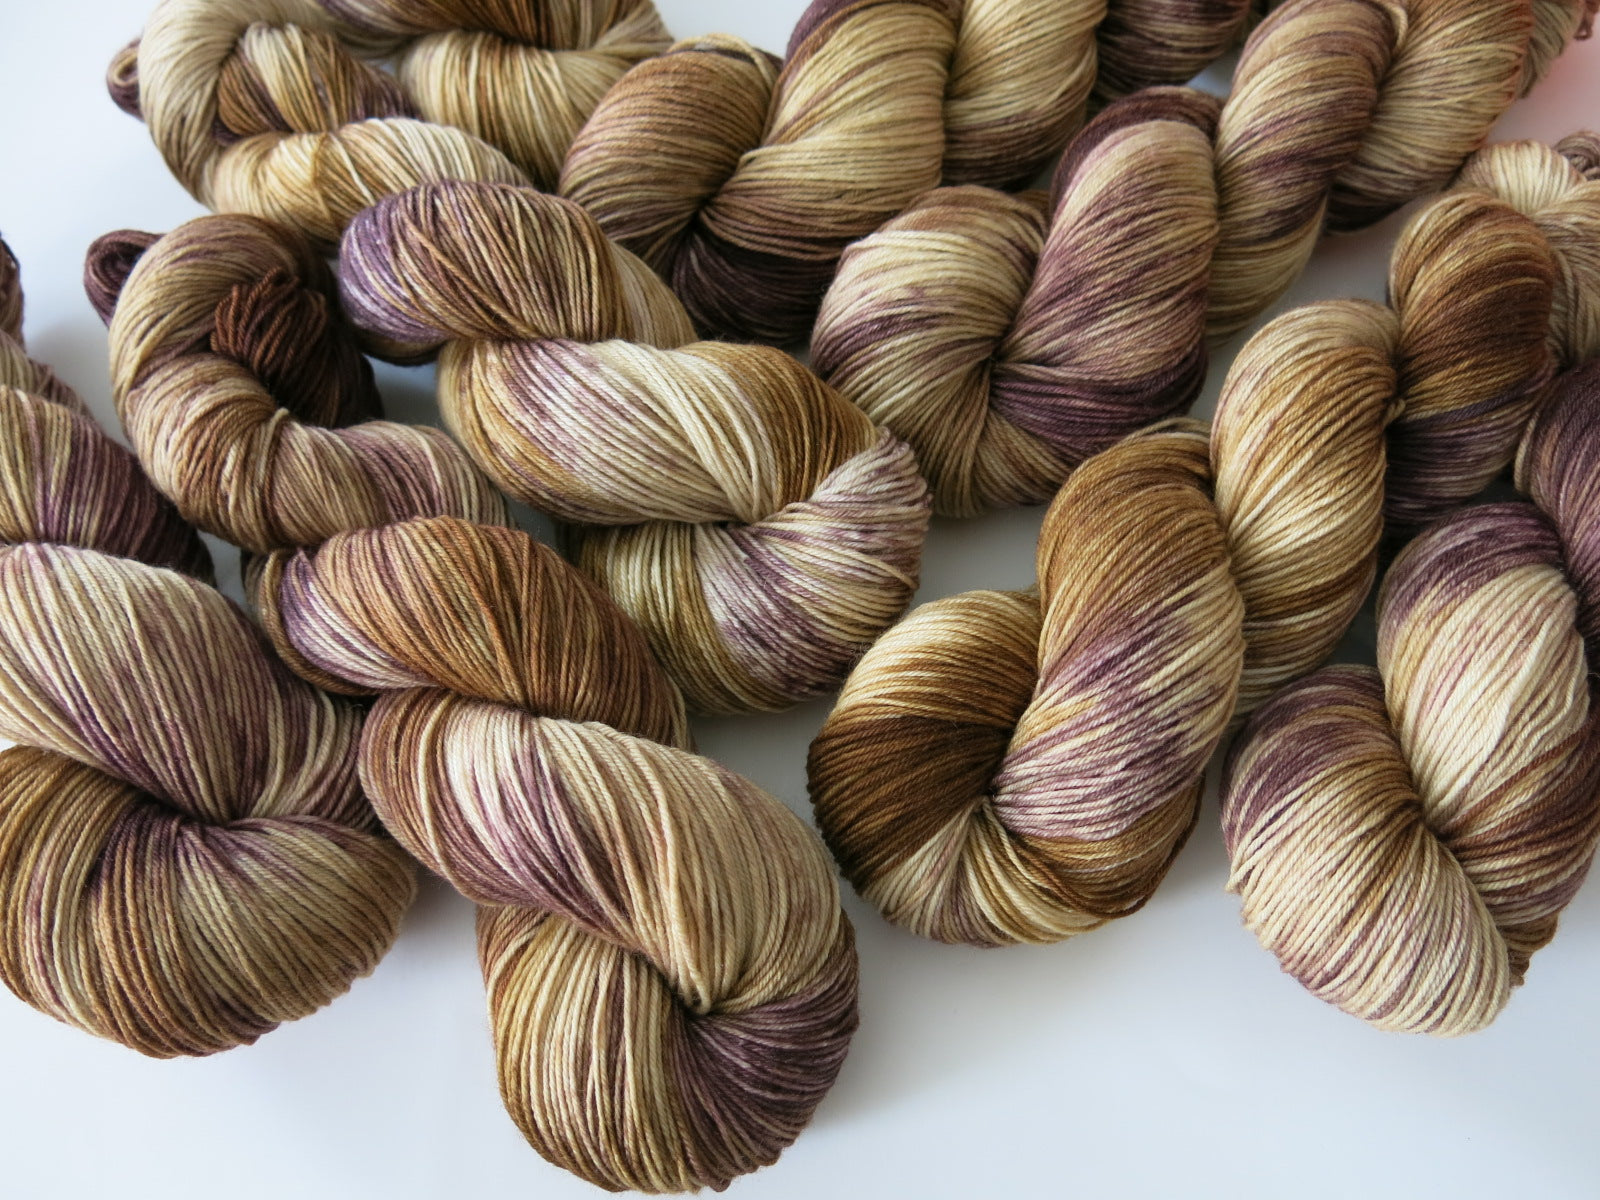 brown kettle dyed yarn skeins by indie dyer my mama knits